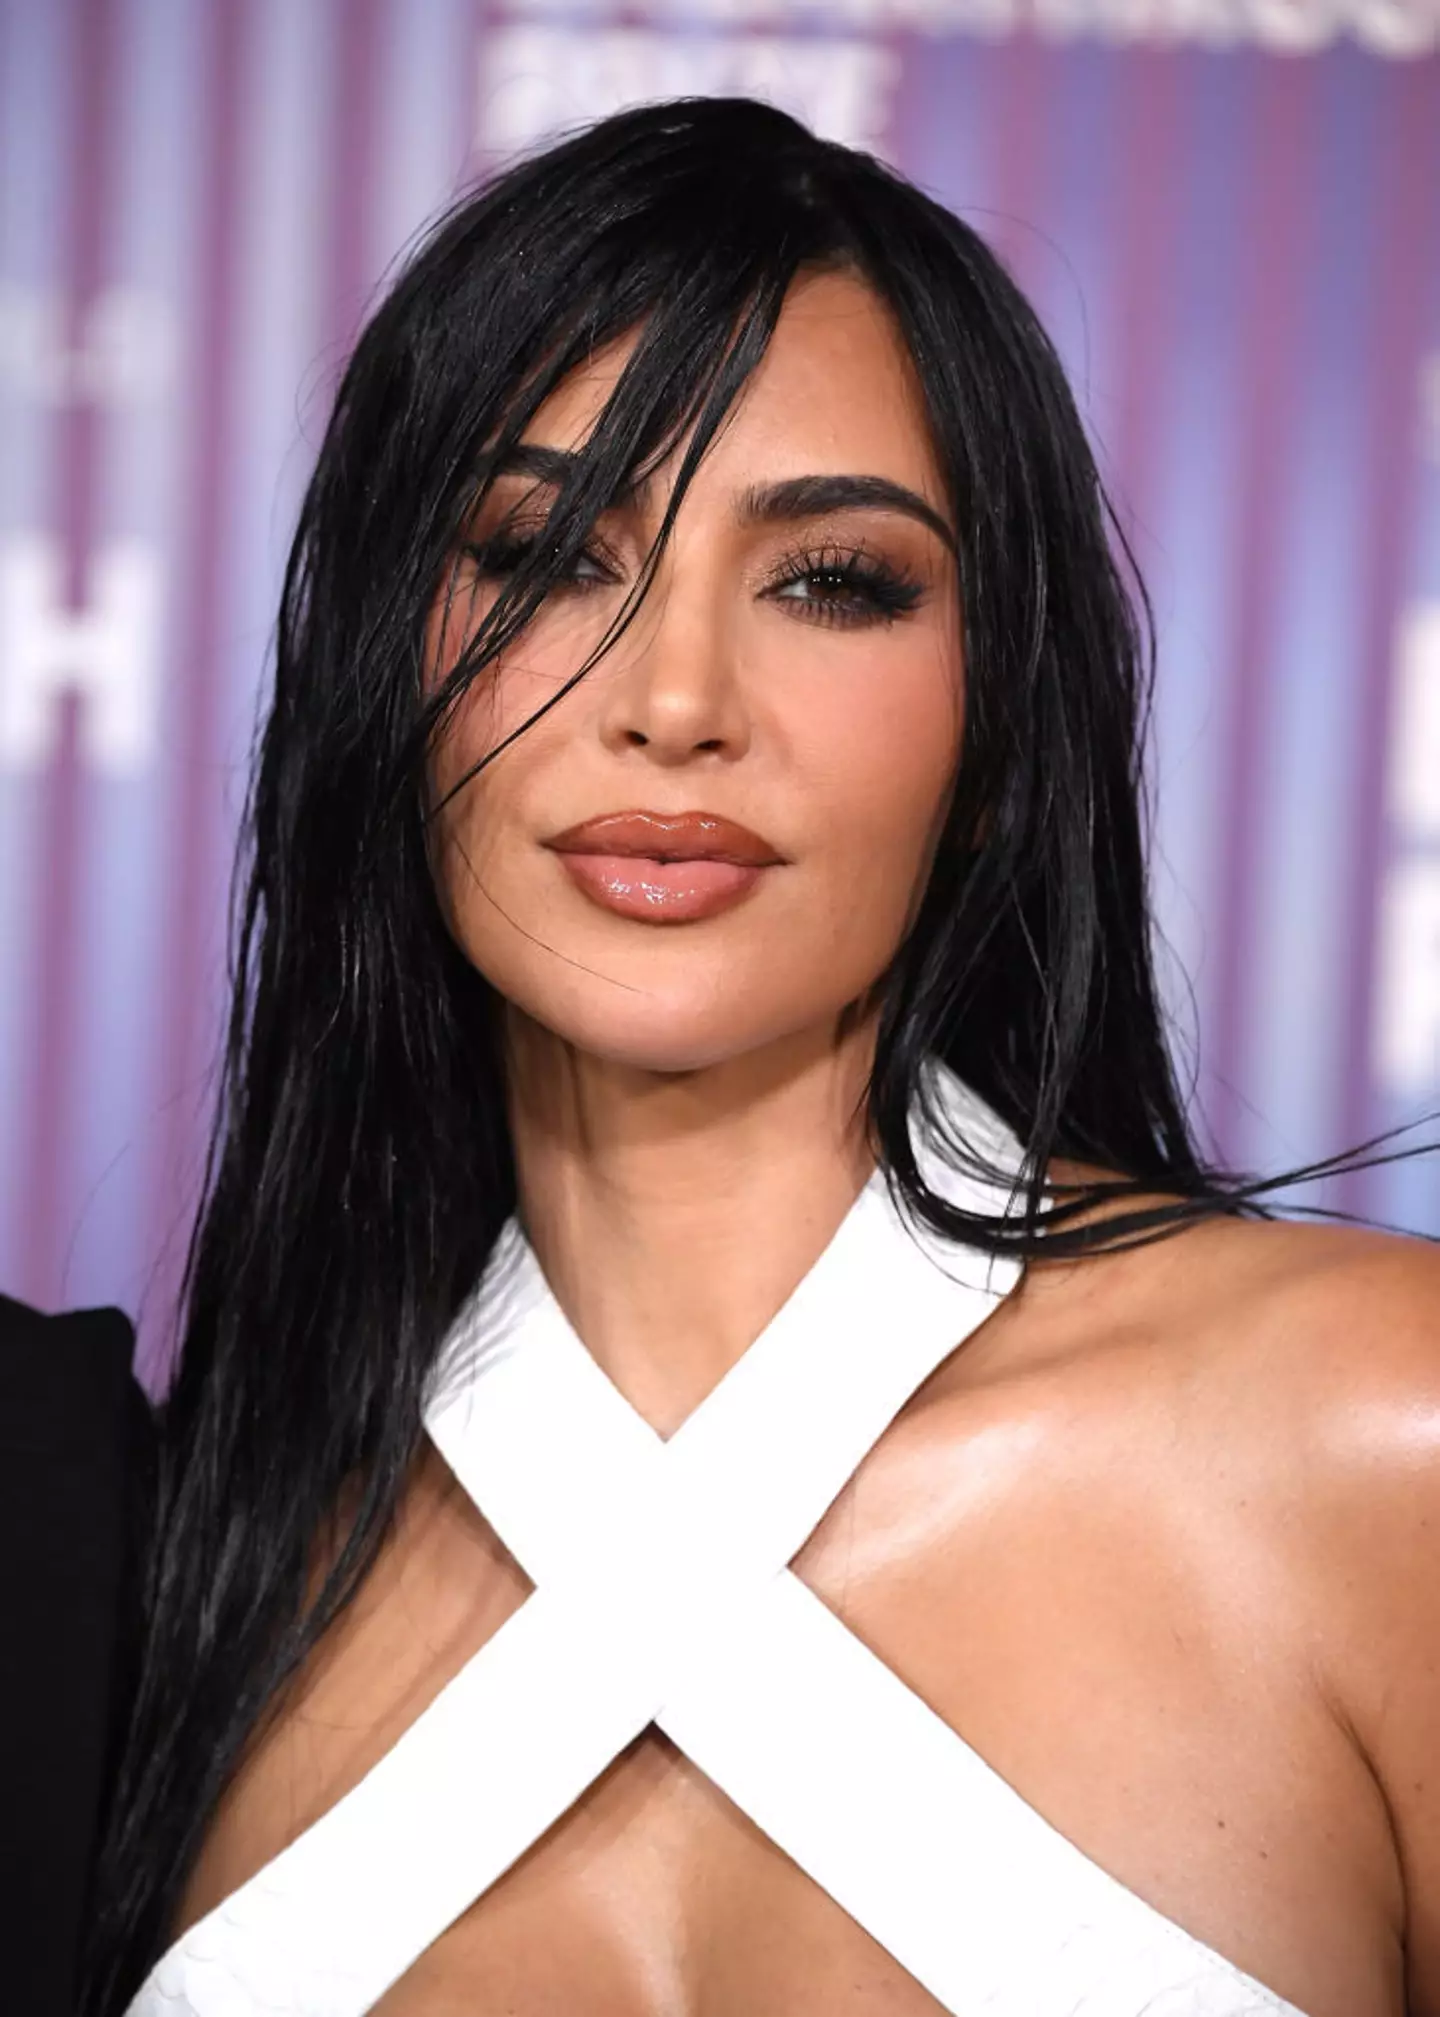 Kim Kardashian released a call between Taylor and ex-husband Kanye. (Steve Granitz / Contributor / Getty Images)